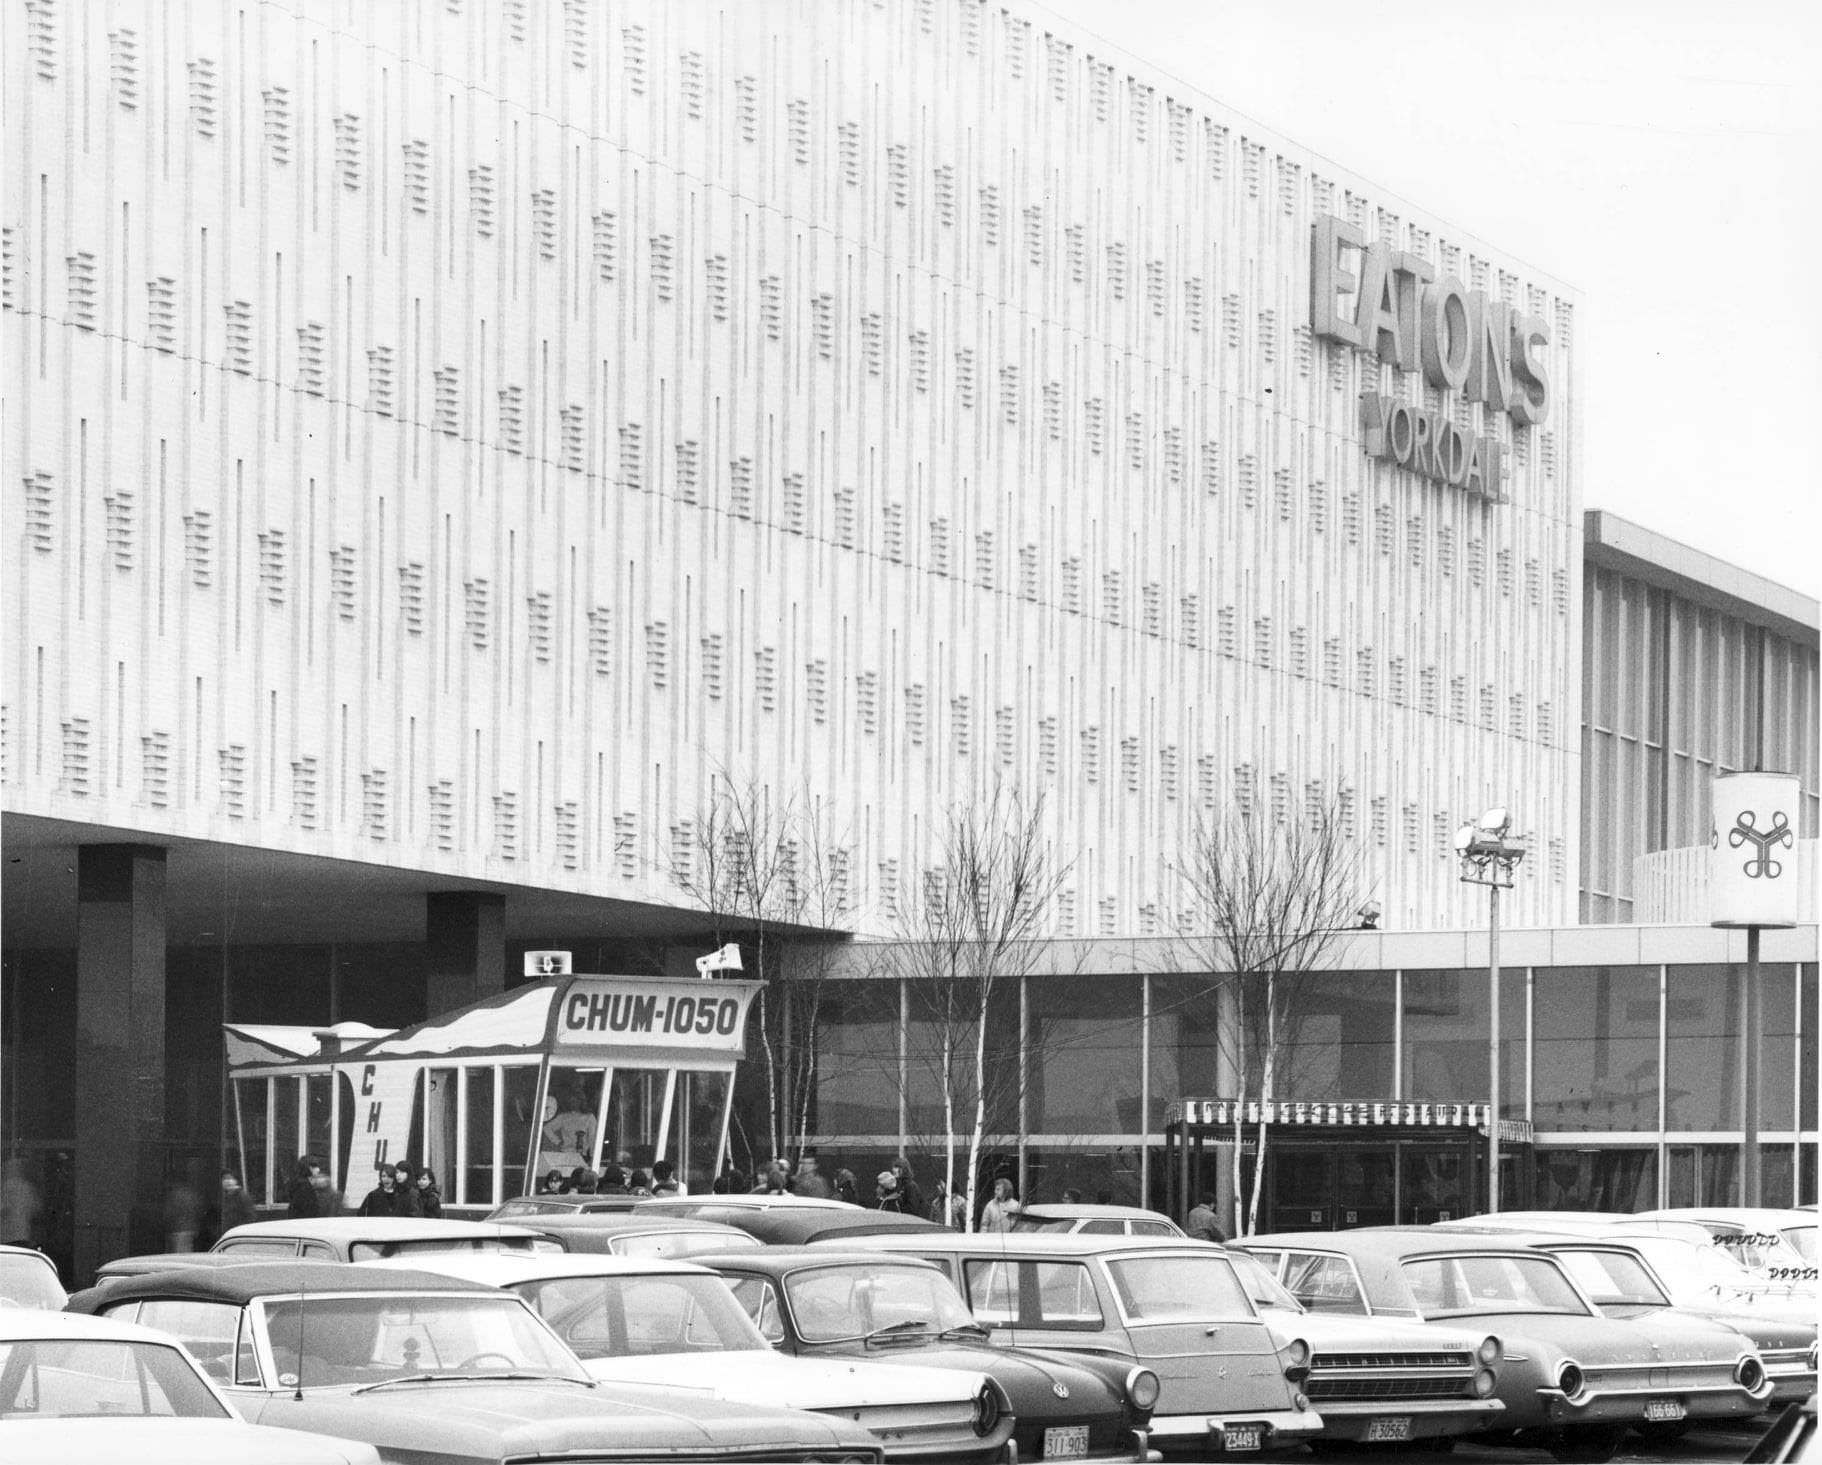 CHUM booth set up at Eatons Yorkdale in the 1960s